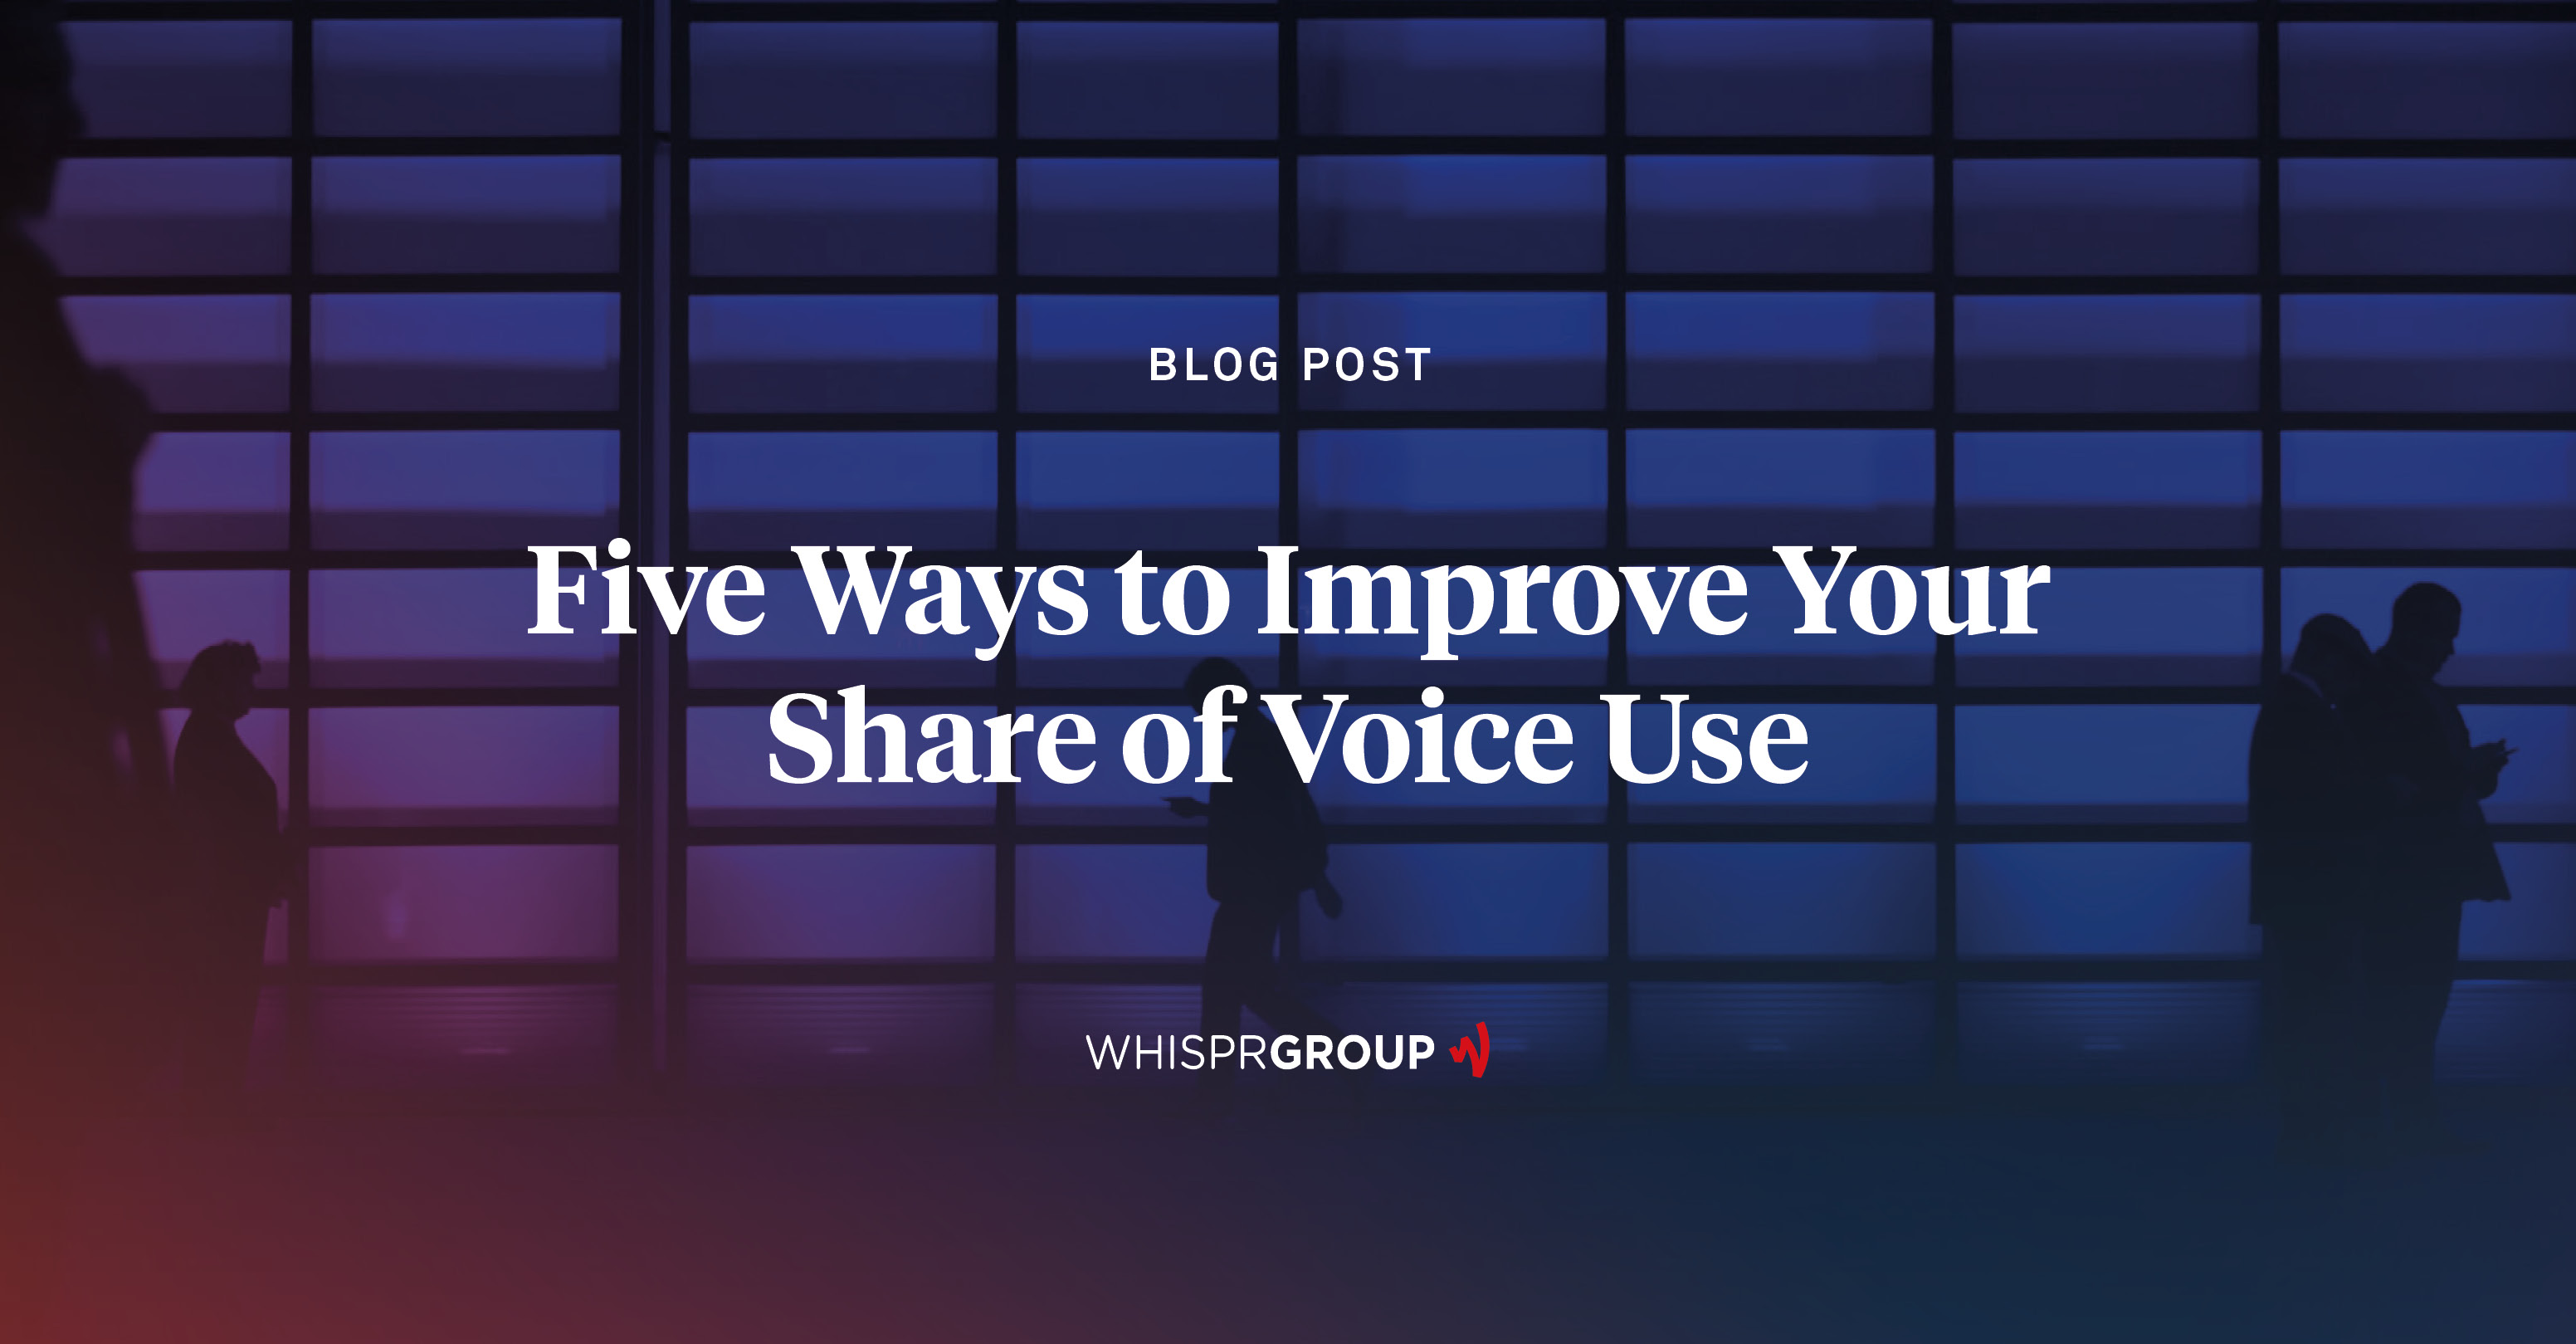 Whispr Group break down five ways to gain more insight from share of voice measurement